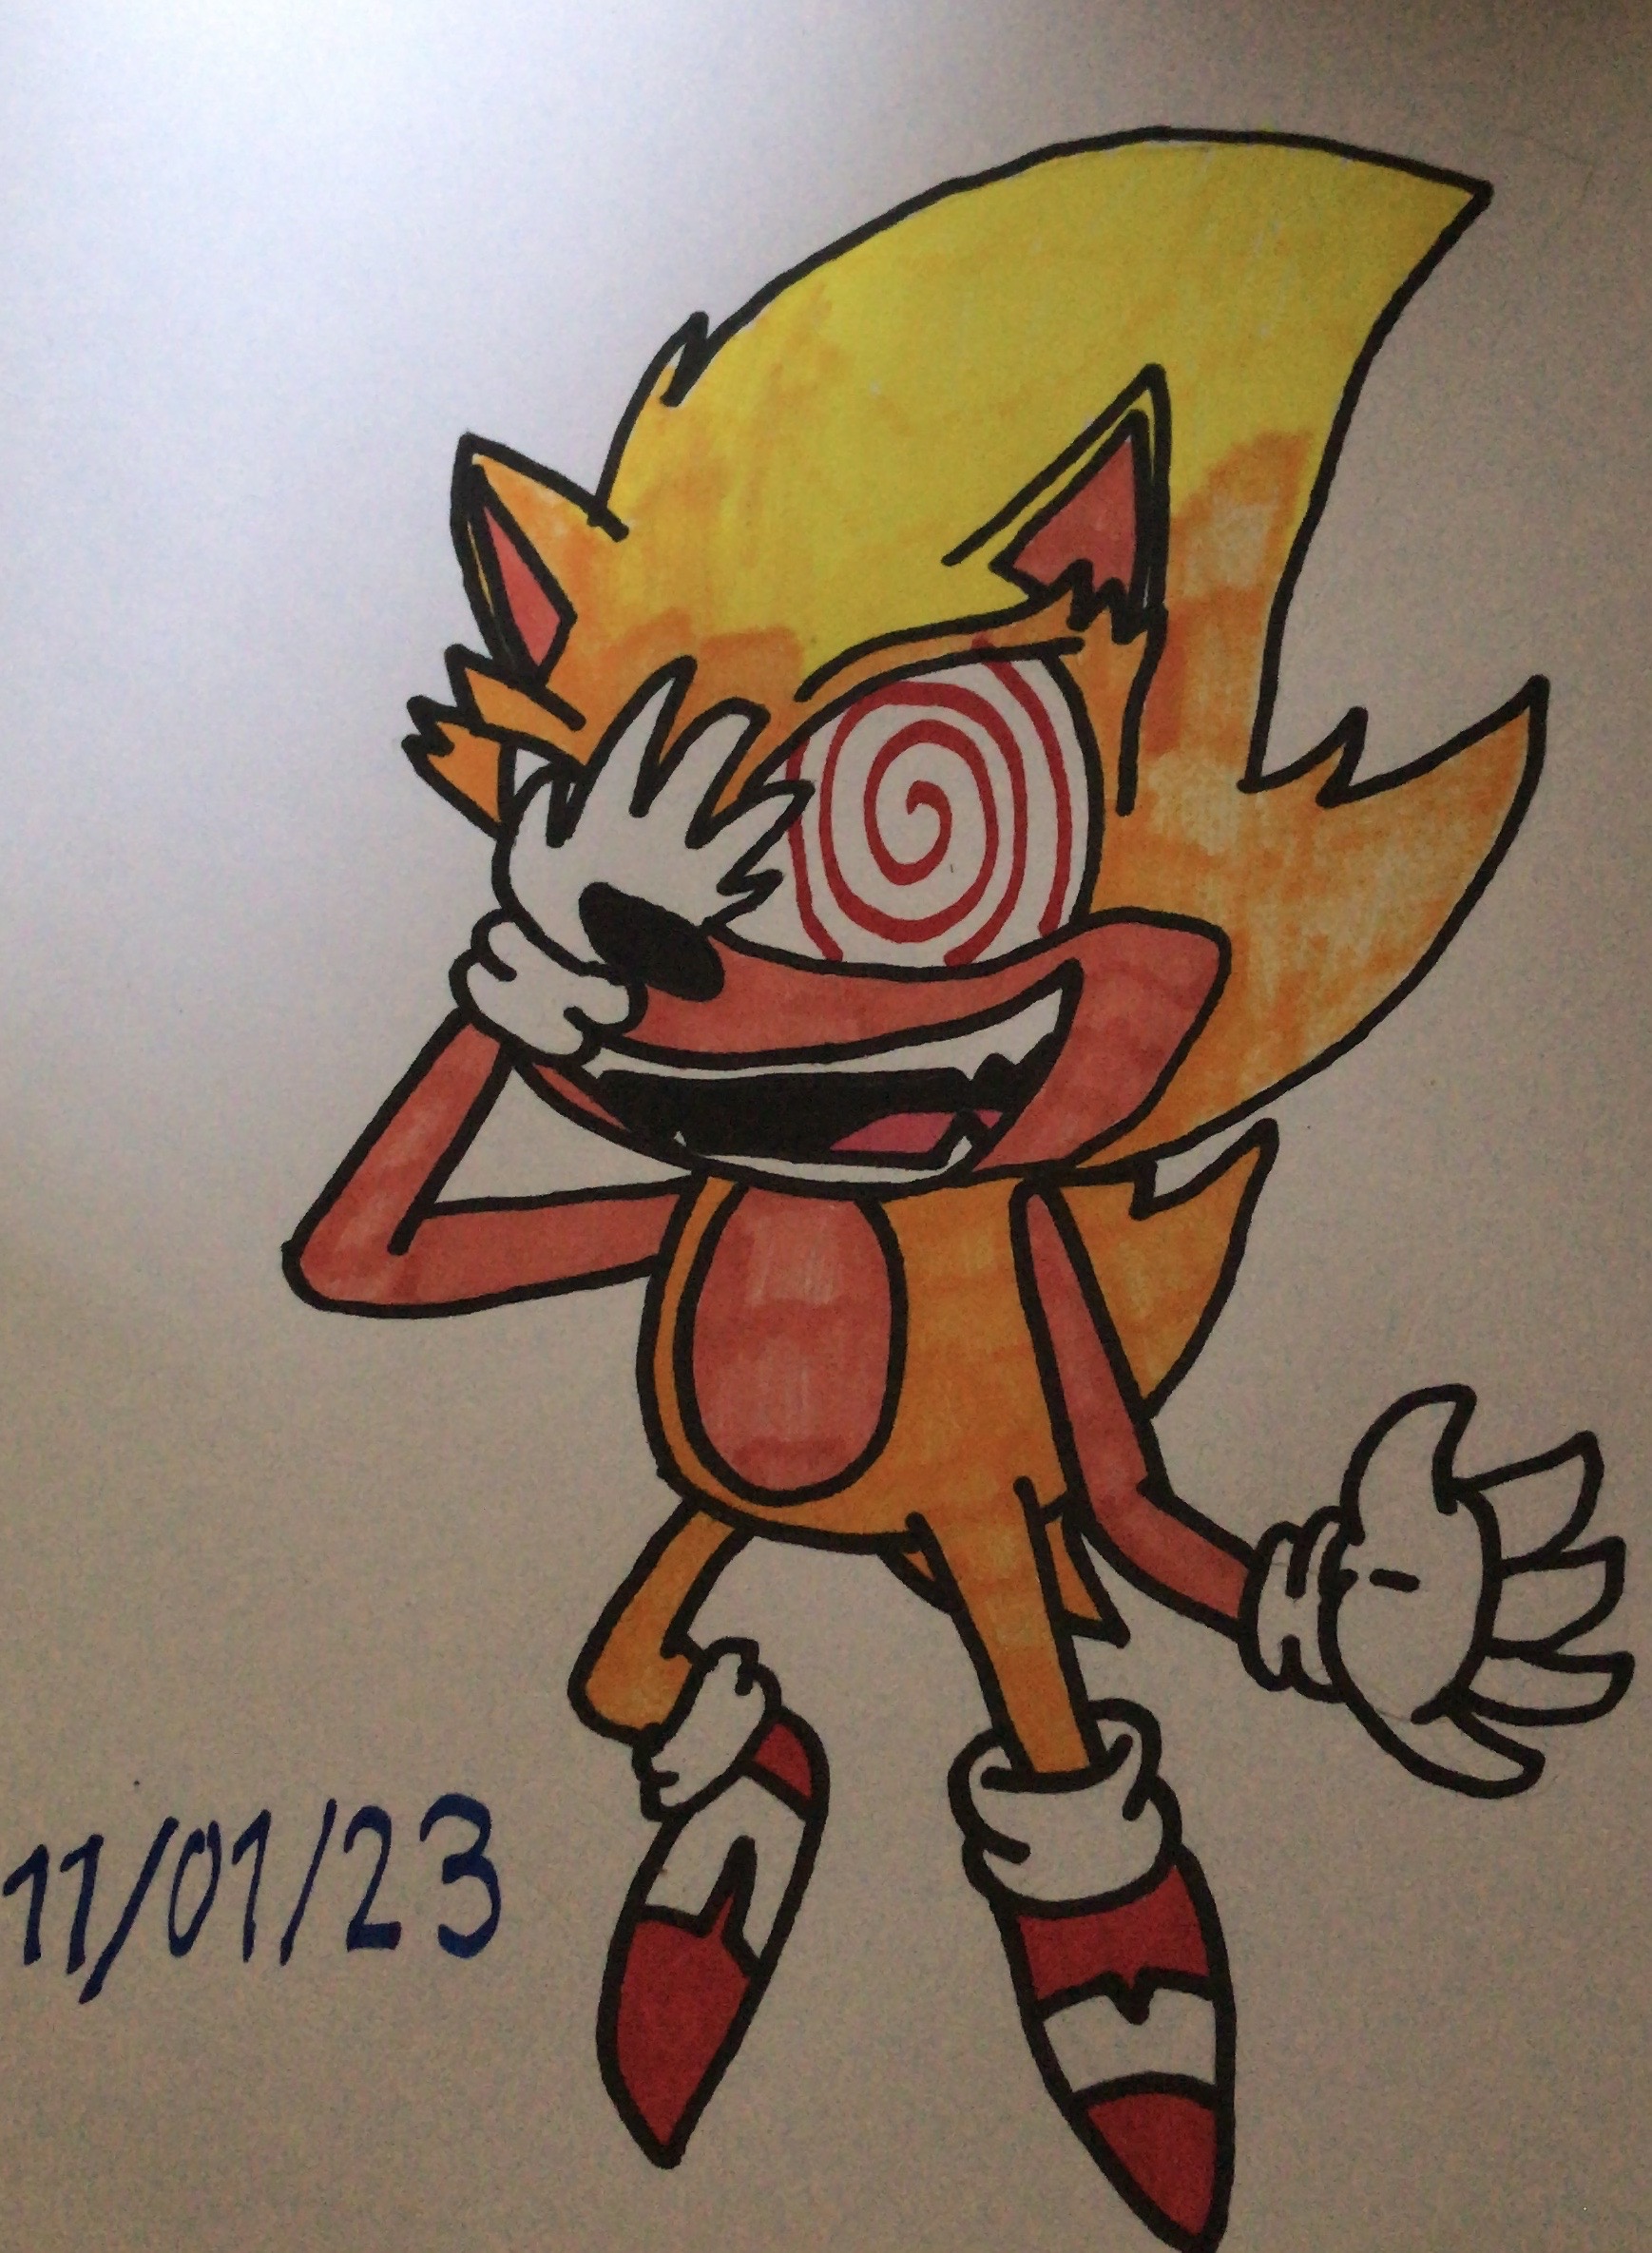 Fleetway Super Sonic by TheGameArtCritic - Fanart Central